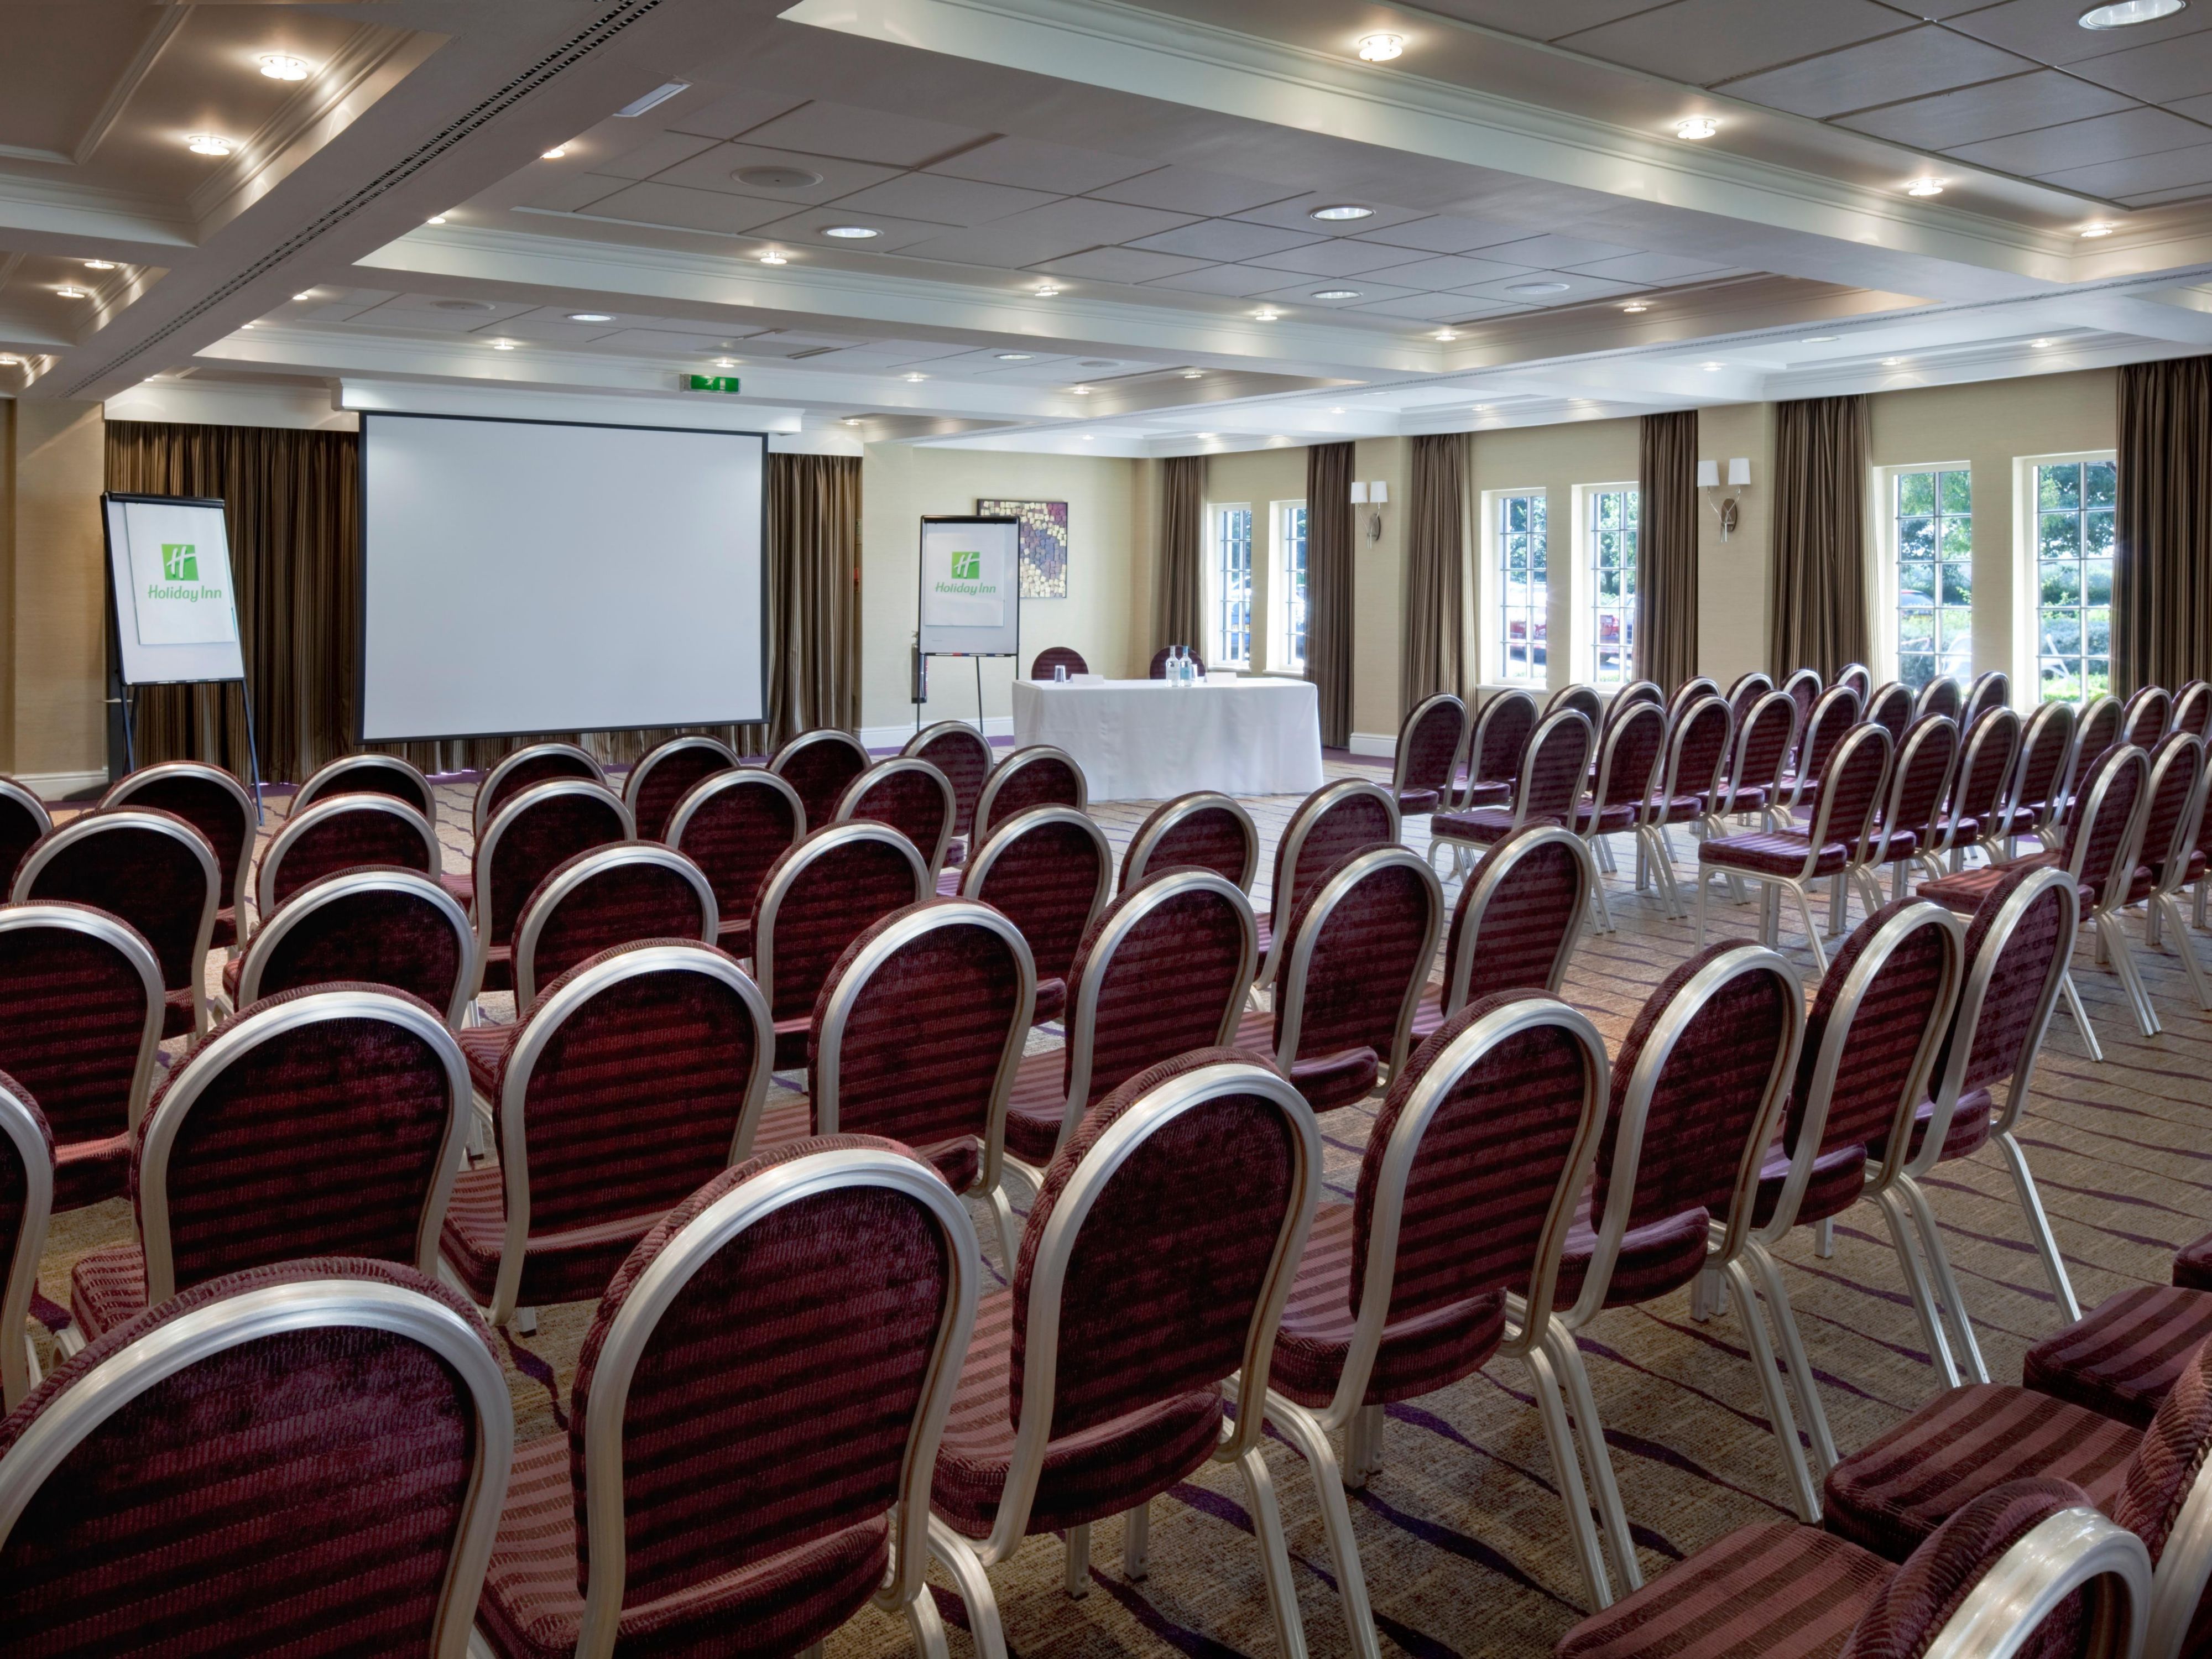 Looking for the perfect location for your next meeting? We have a range of spaces and experienced staff to ensure your meeting runs smoothly.